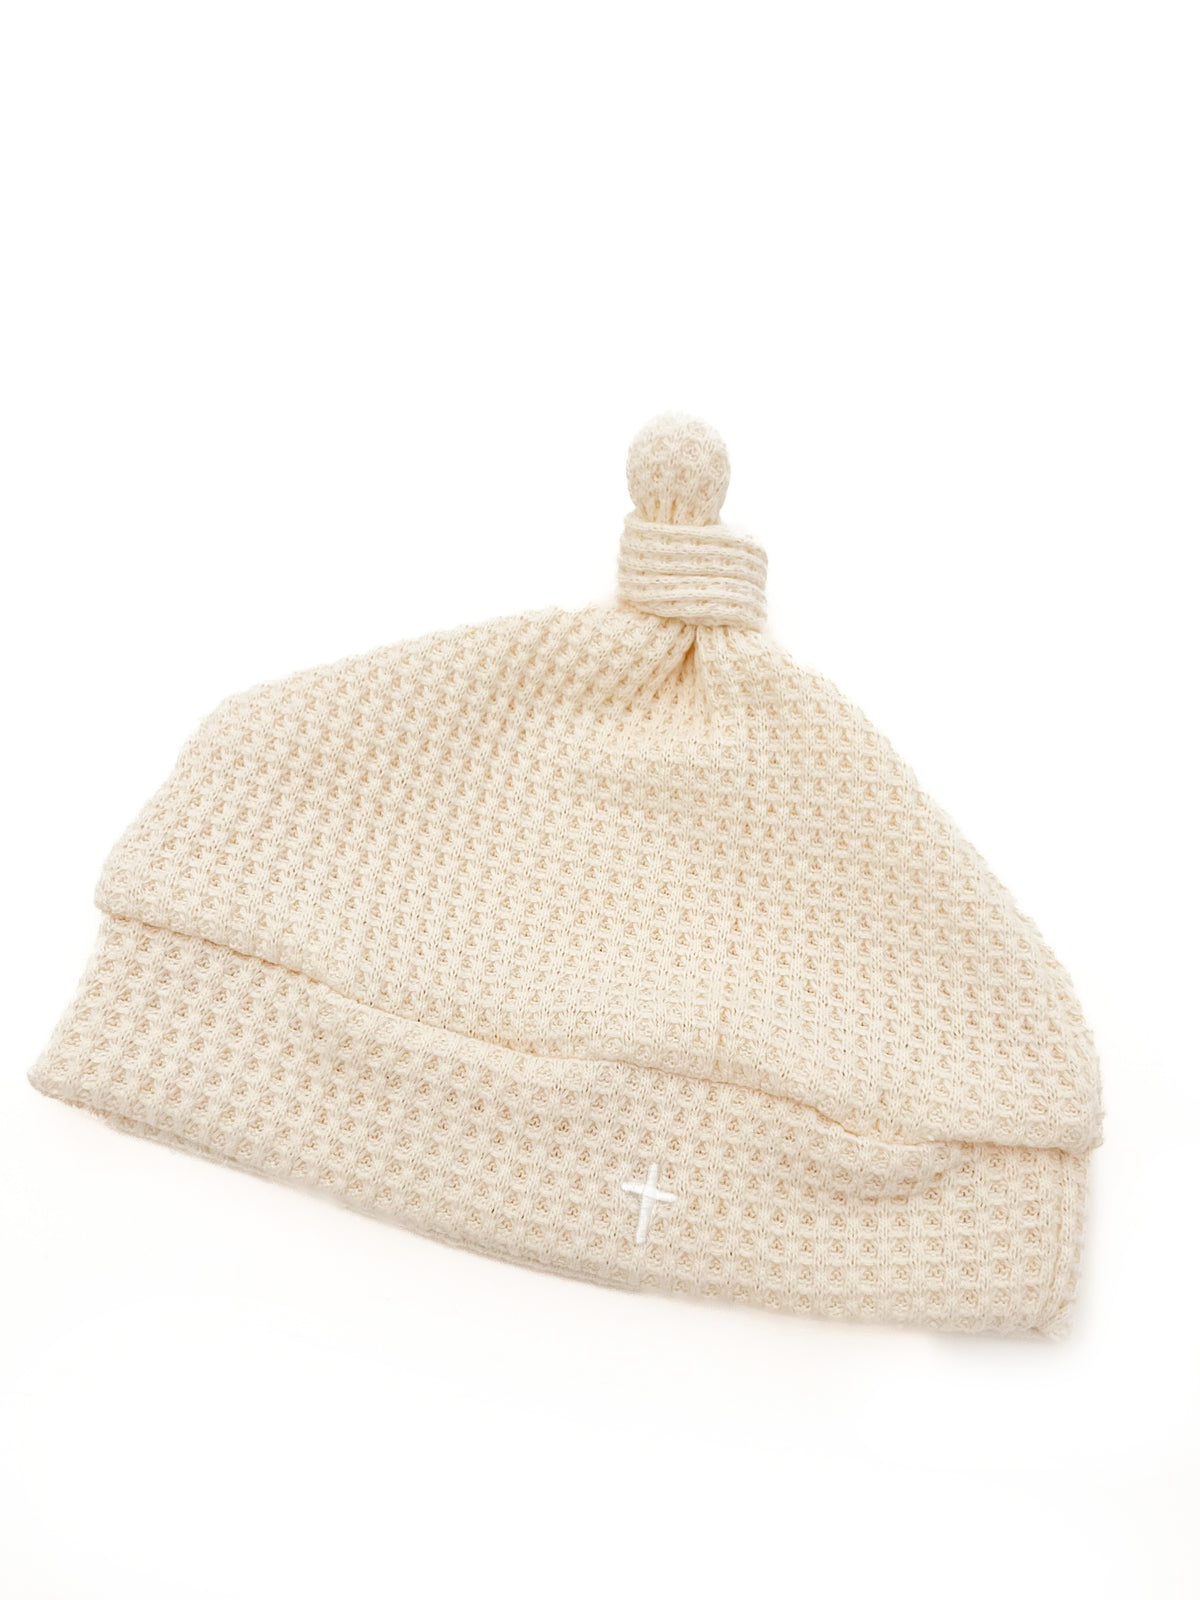 Psalm 127:3 Knotted Baby Sleeper & Matching Beanie